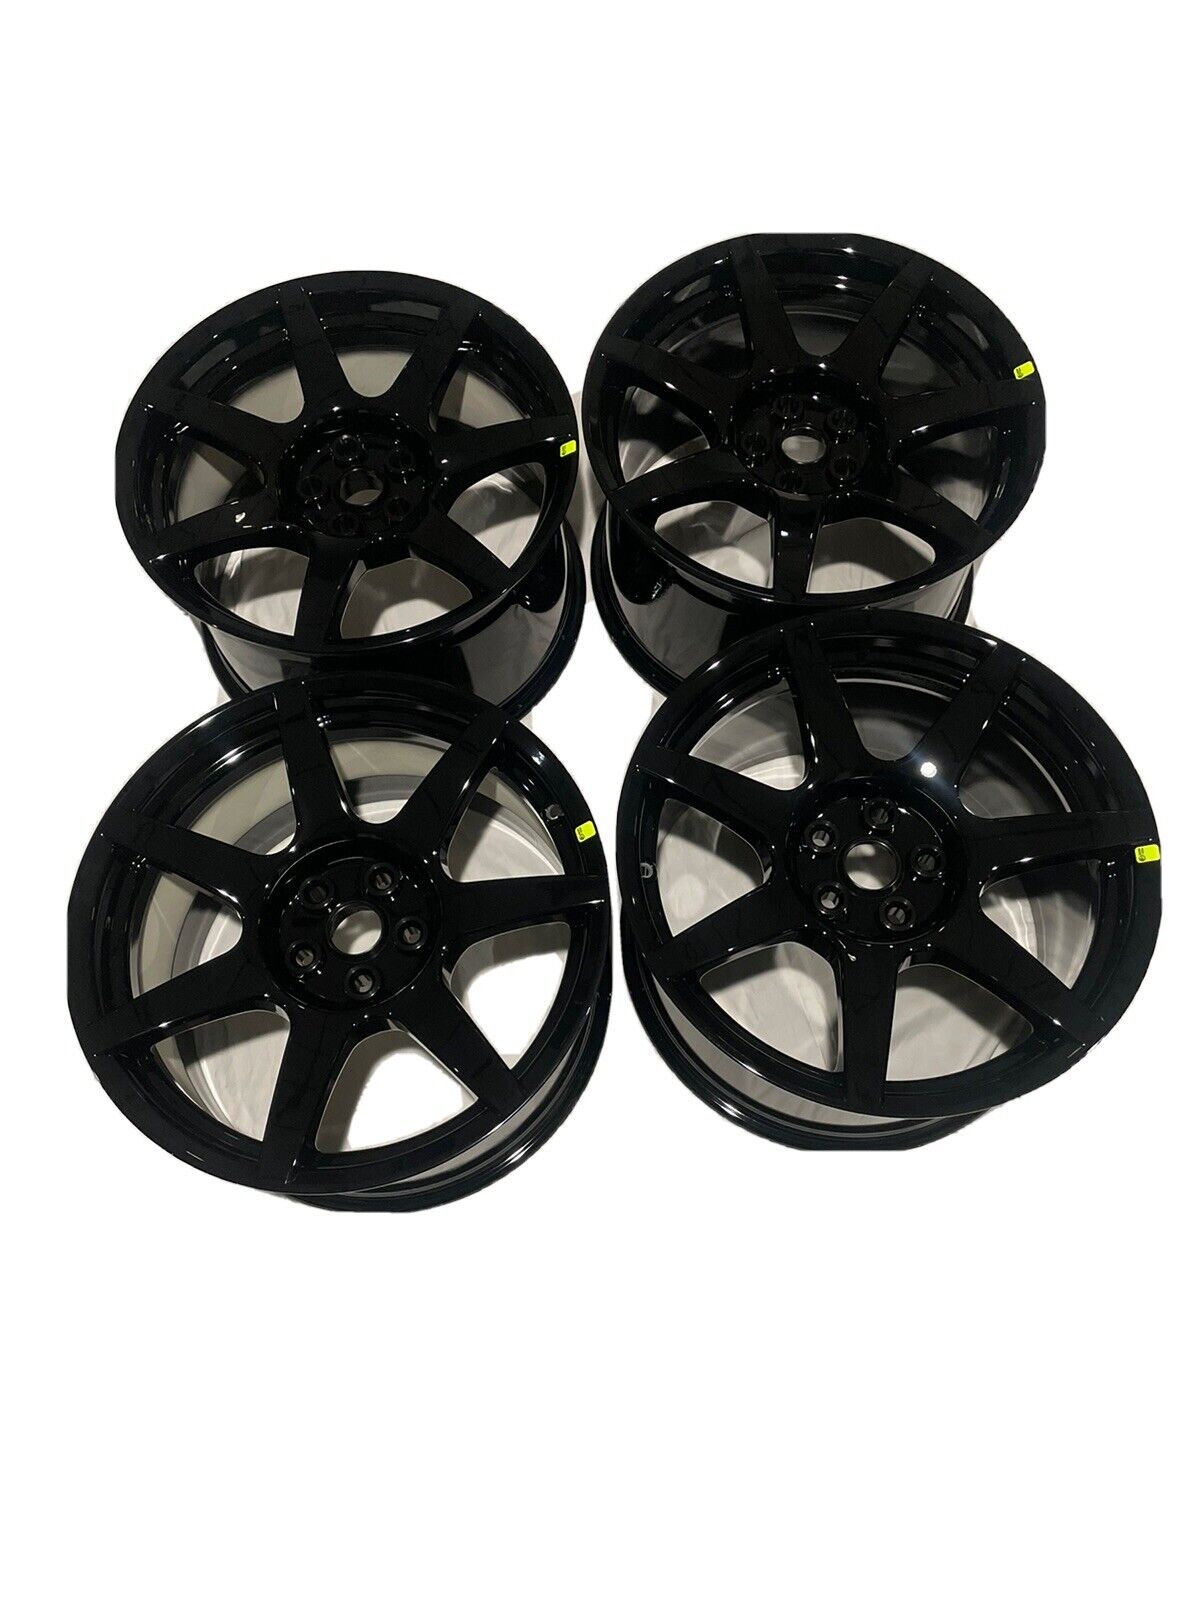 Brand new Set Of 4 Ford Mustang Shelby GT350R OEM Carbon Fiber Wheels.